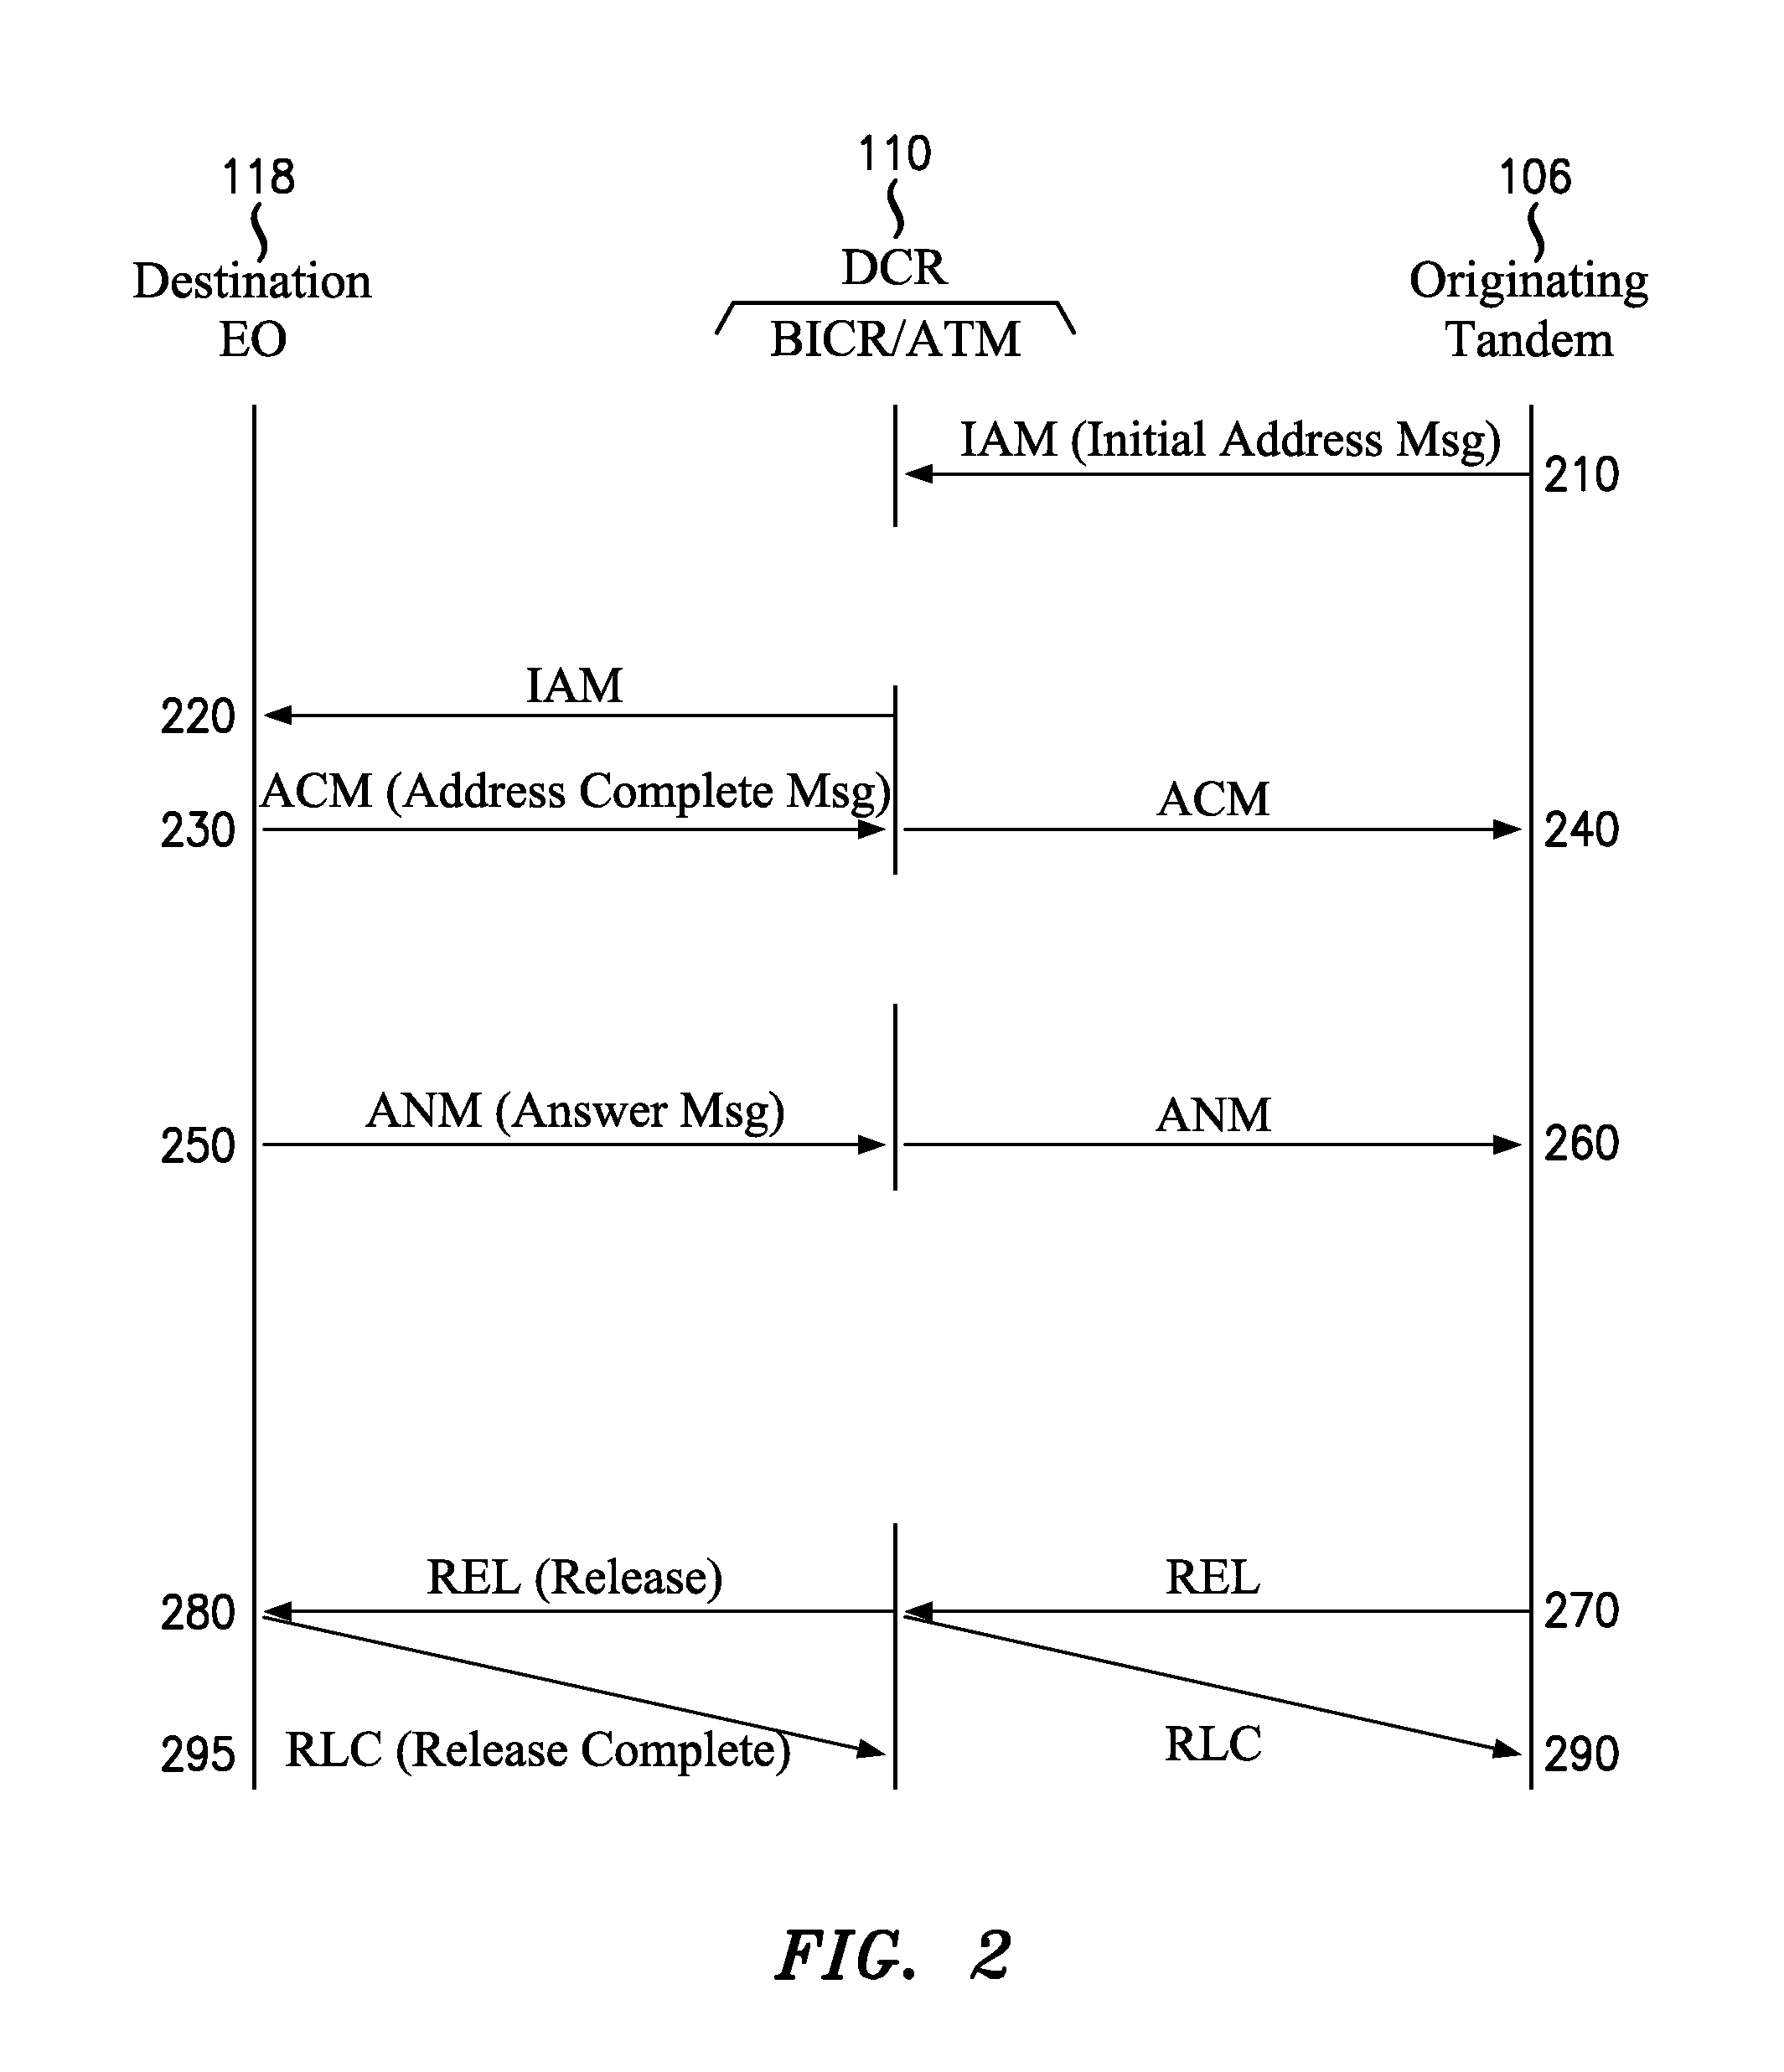 Destination call routing apparatus and method